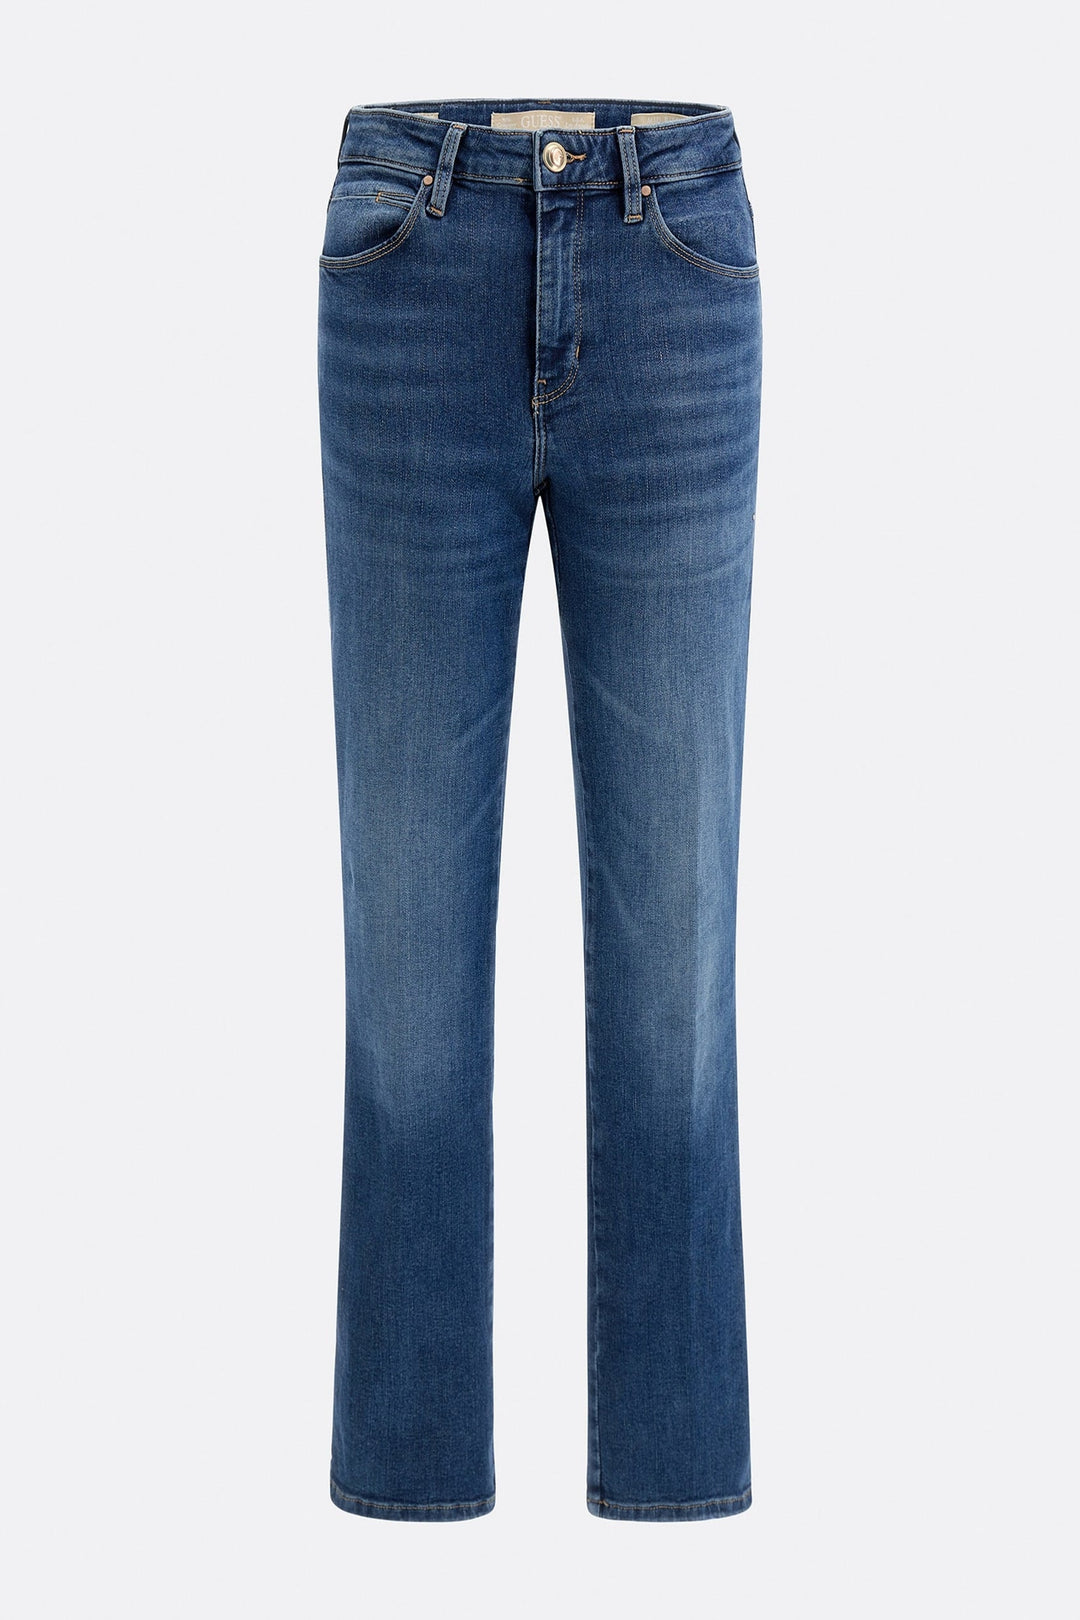 SEXY STRAIGHT DENIM PANT - Guess